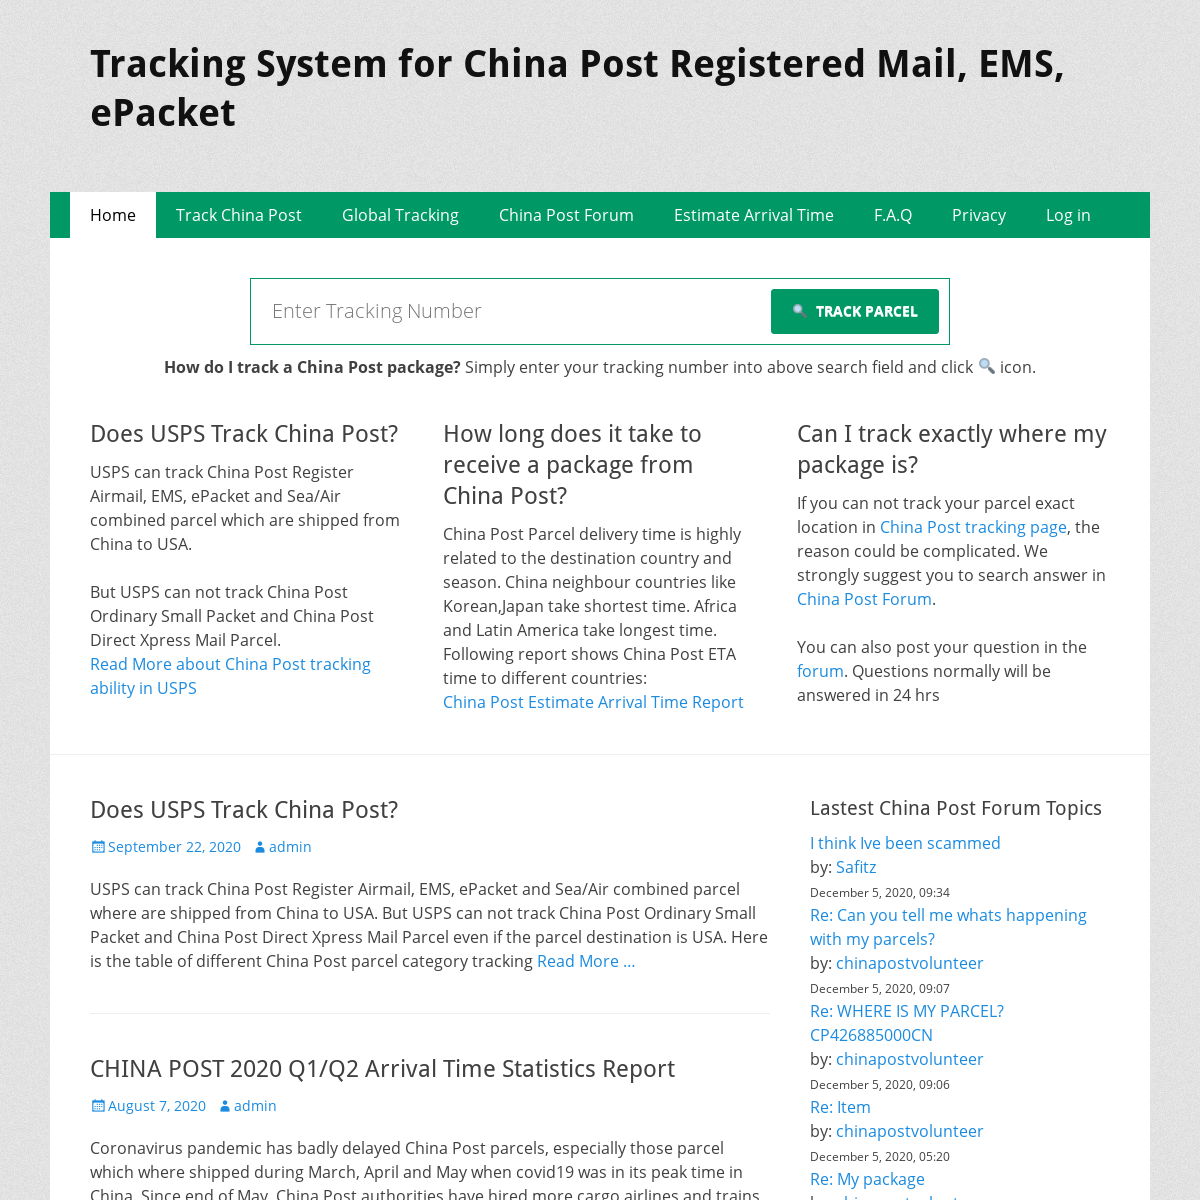 A complete backup of track-chinapost.com